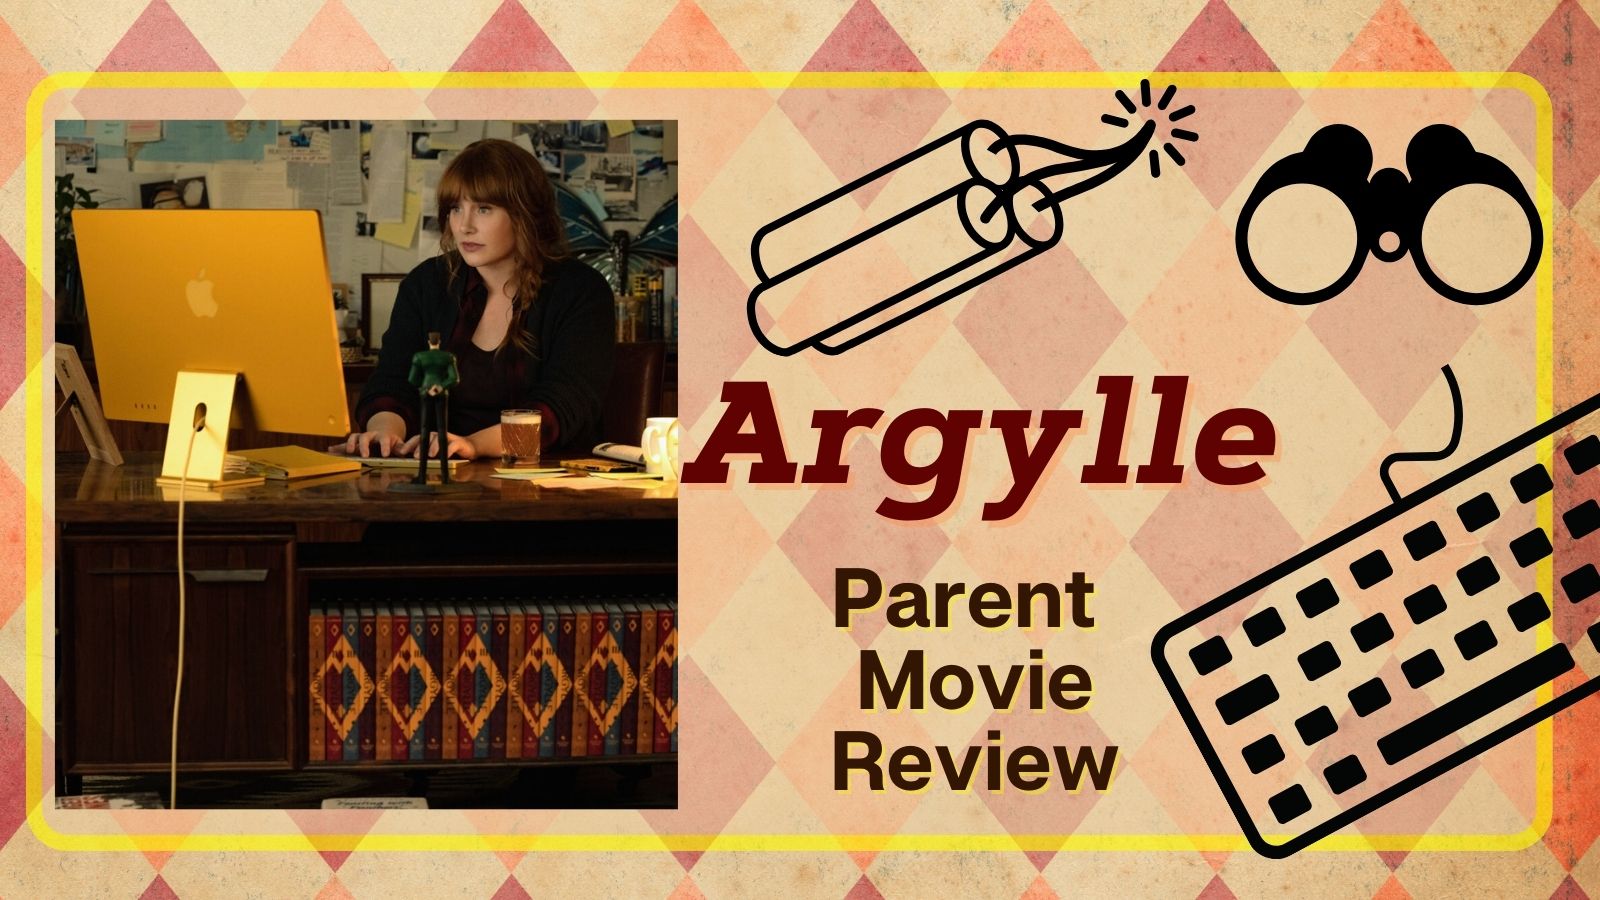 Argylle parent review title image on red and orange argyle background